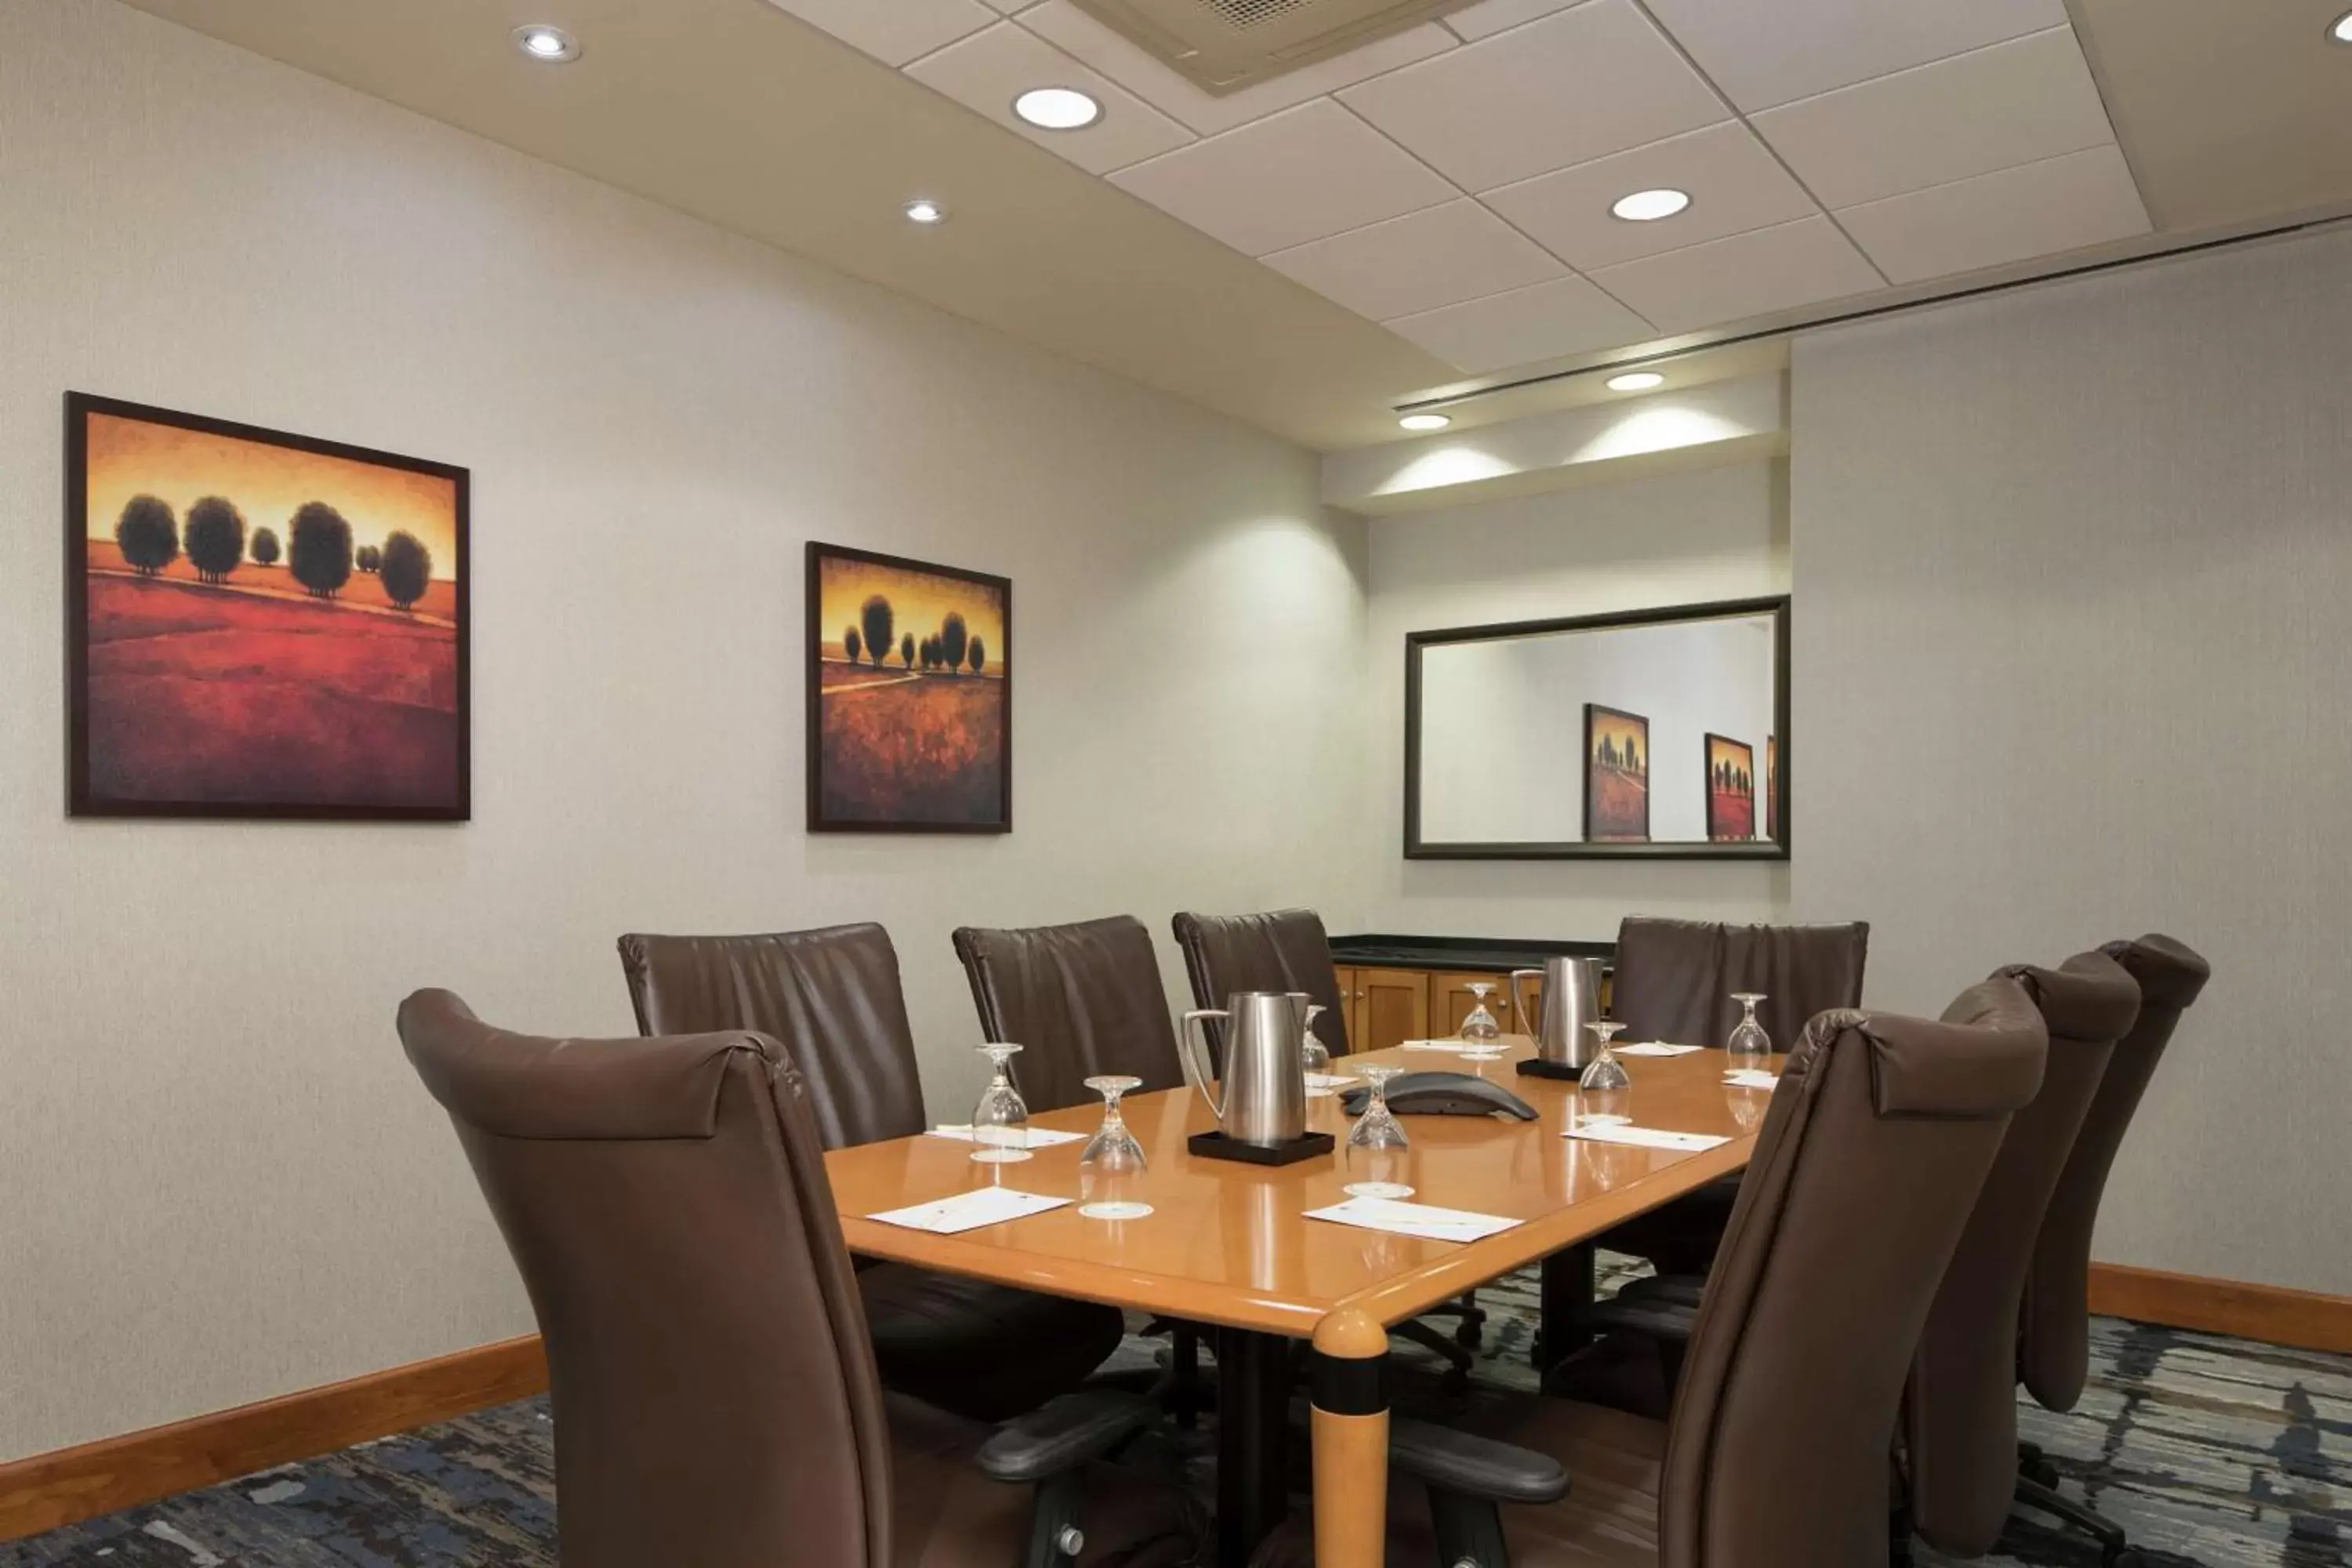 Meeting/conference room in DoubleTree by Hilton Hotel Syracuse